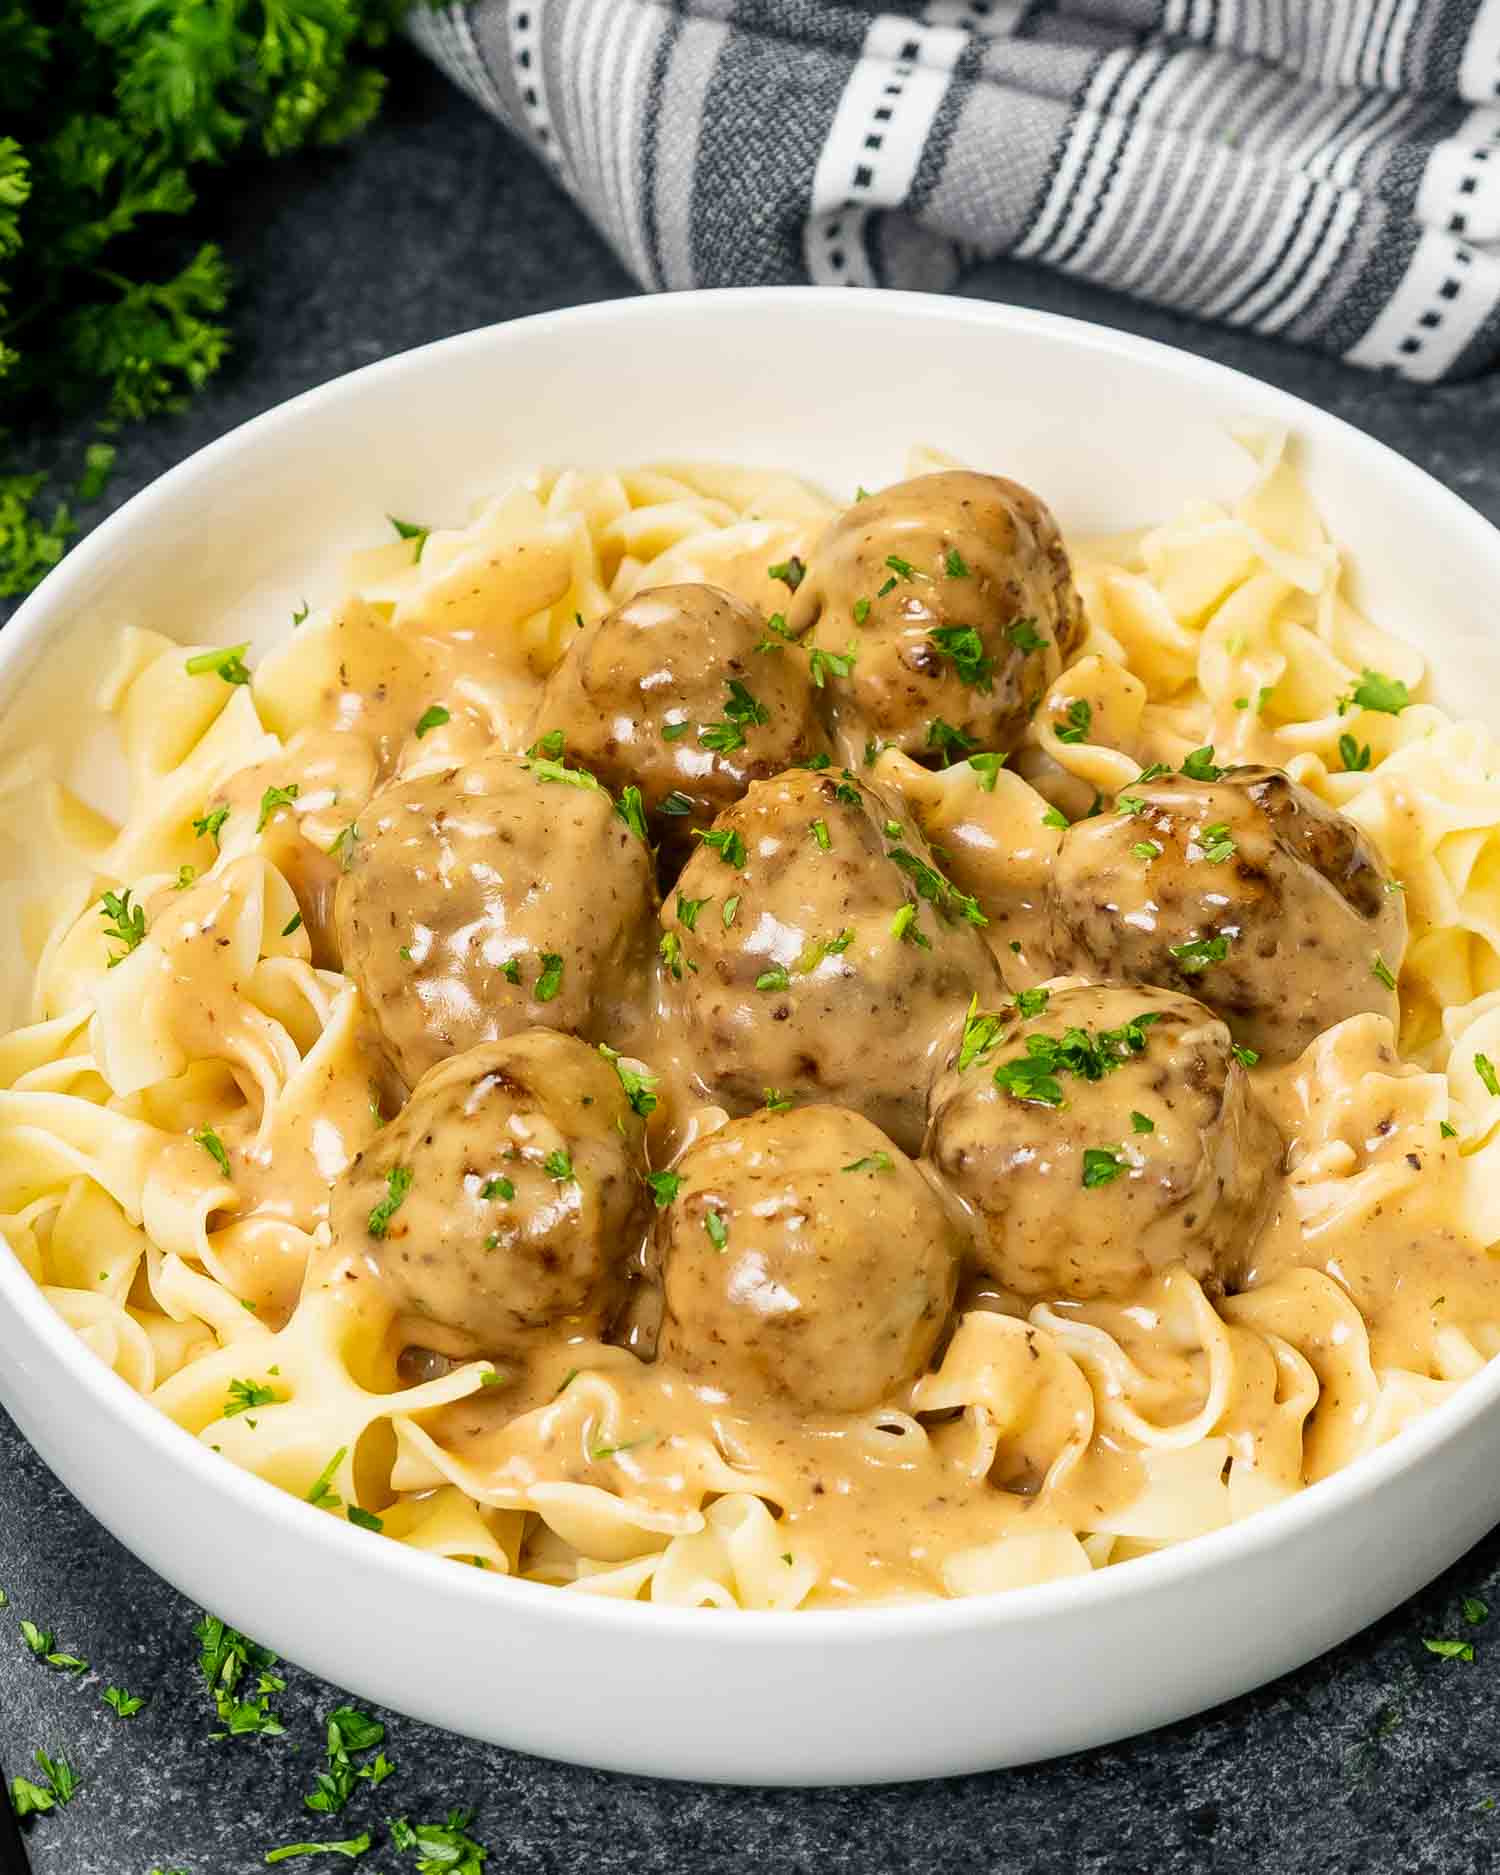 a serving of freshly made swedish meatballs over a bed of noodles.